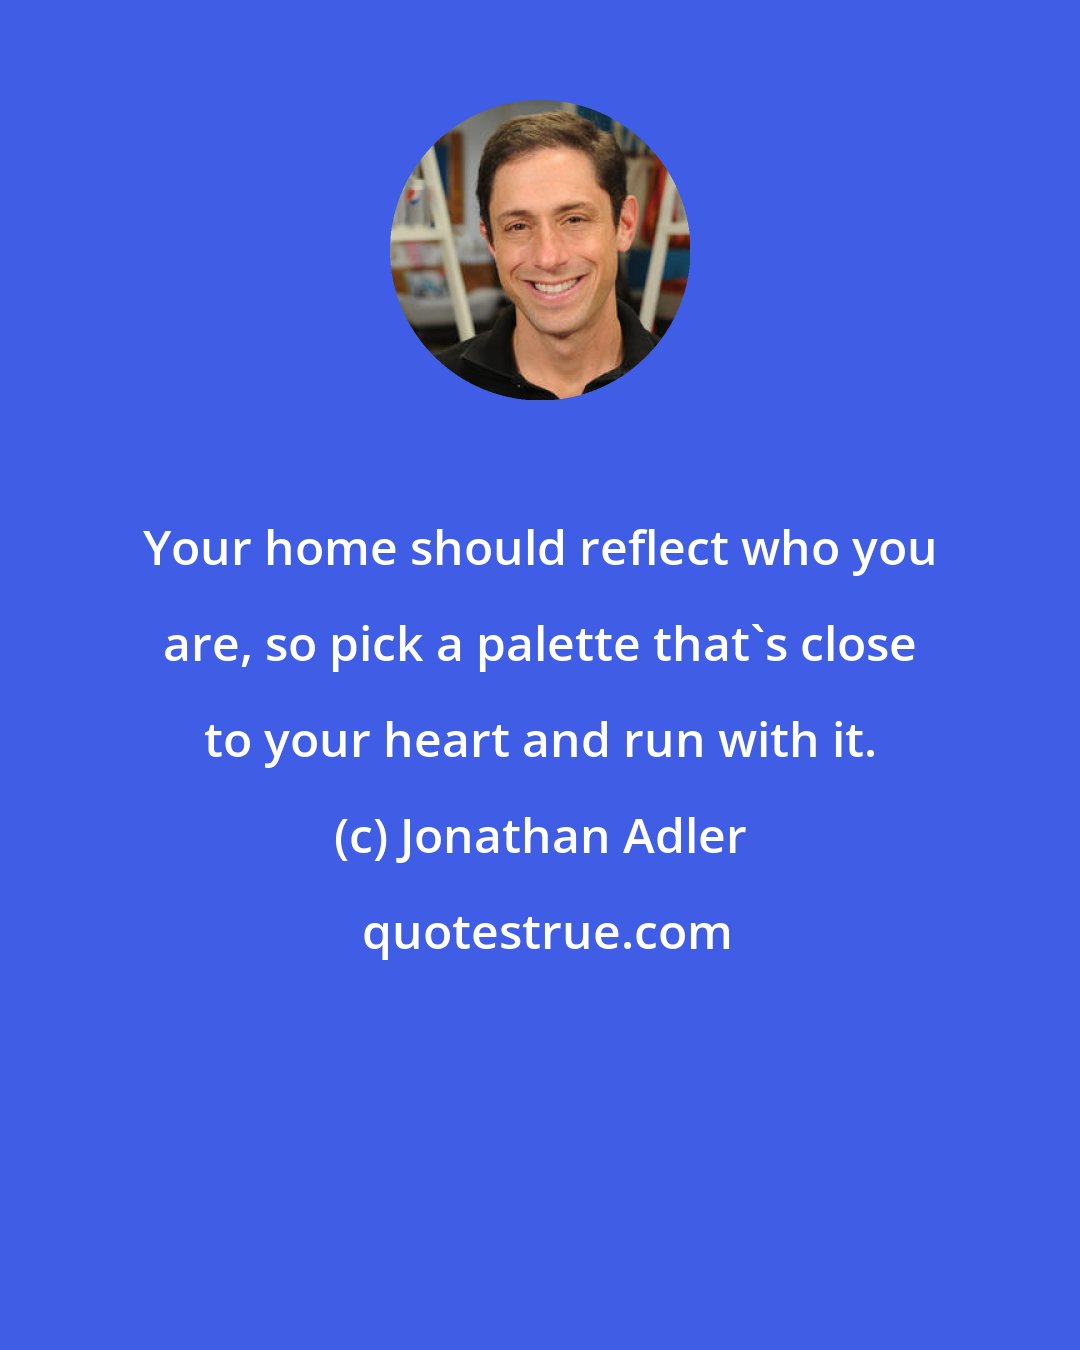 Jonathan Adler: Your home should reflect who you are, so pick a palette that's close to your heart and run with it.